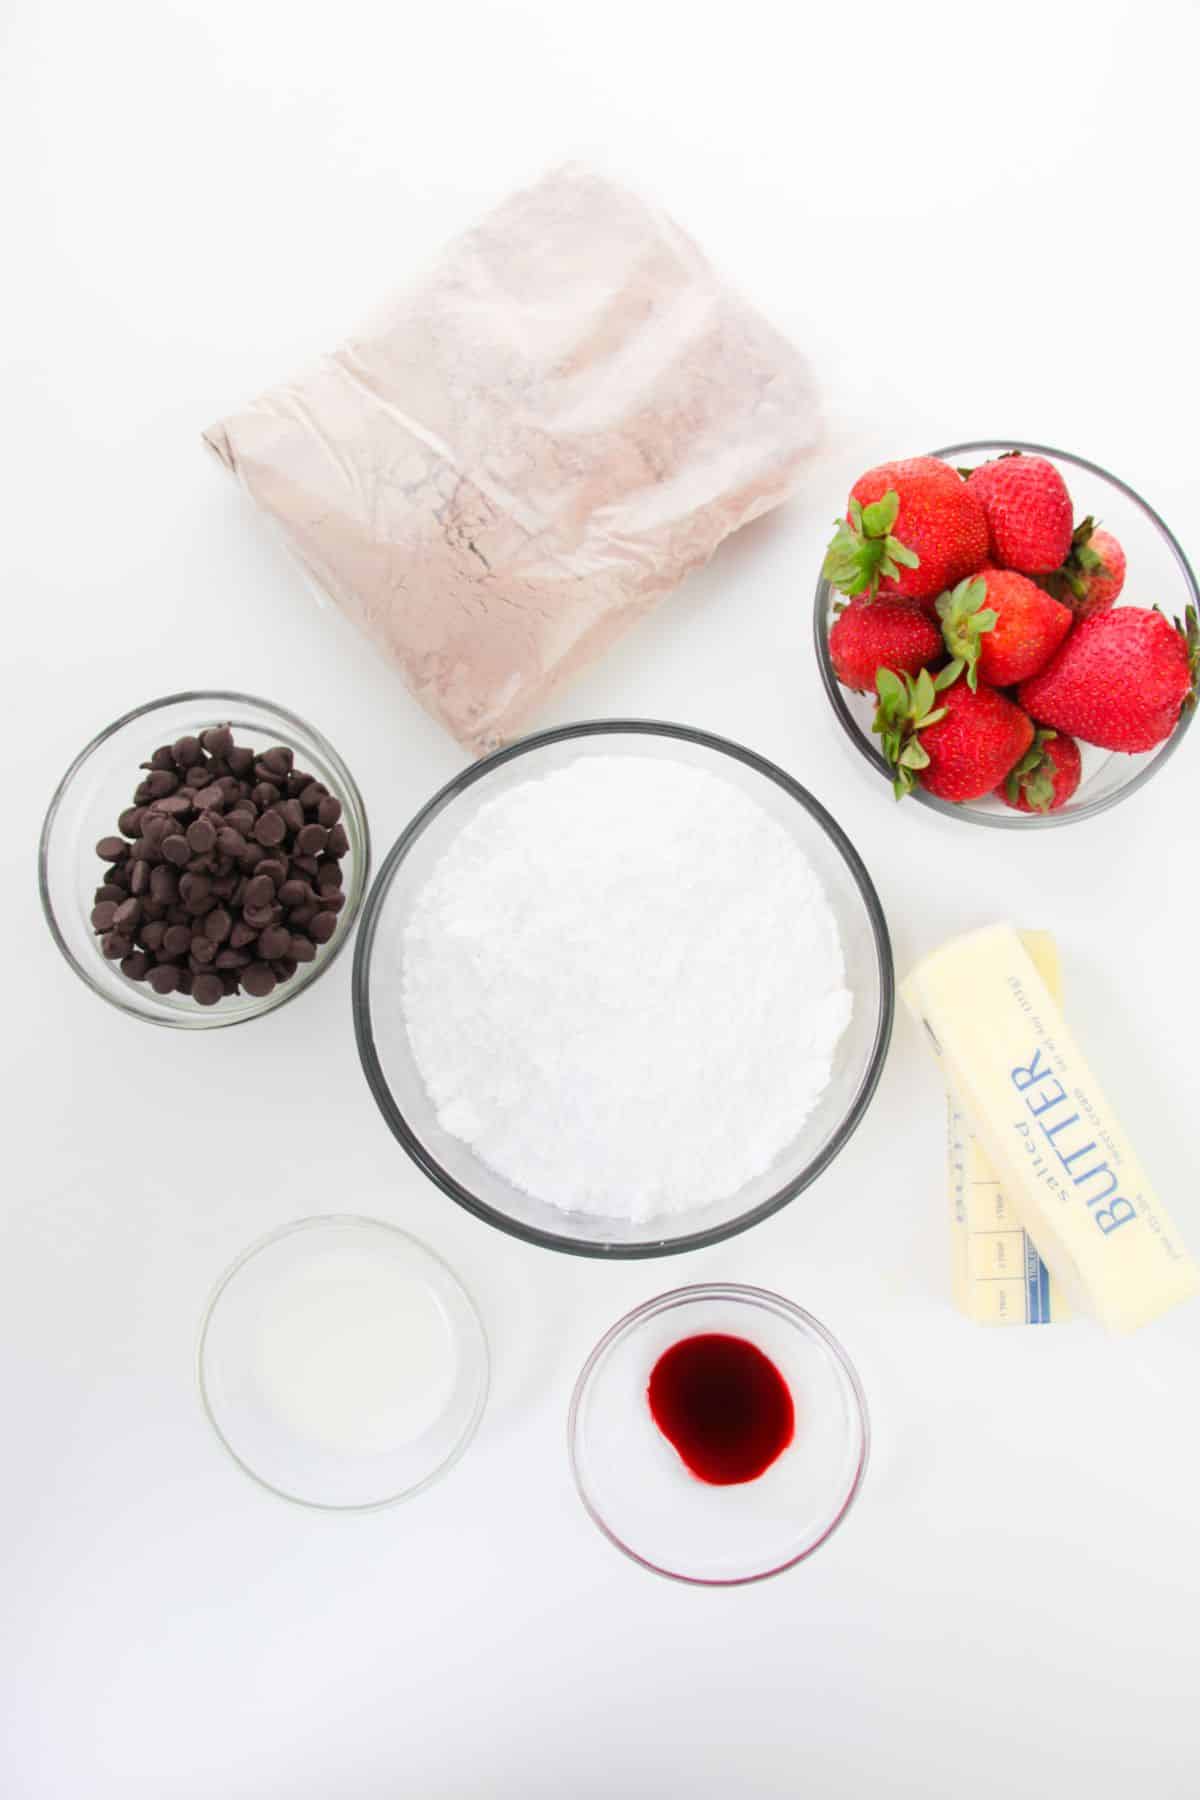 Chocolate Strawberry Cupcakes ingredients.